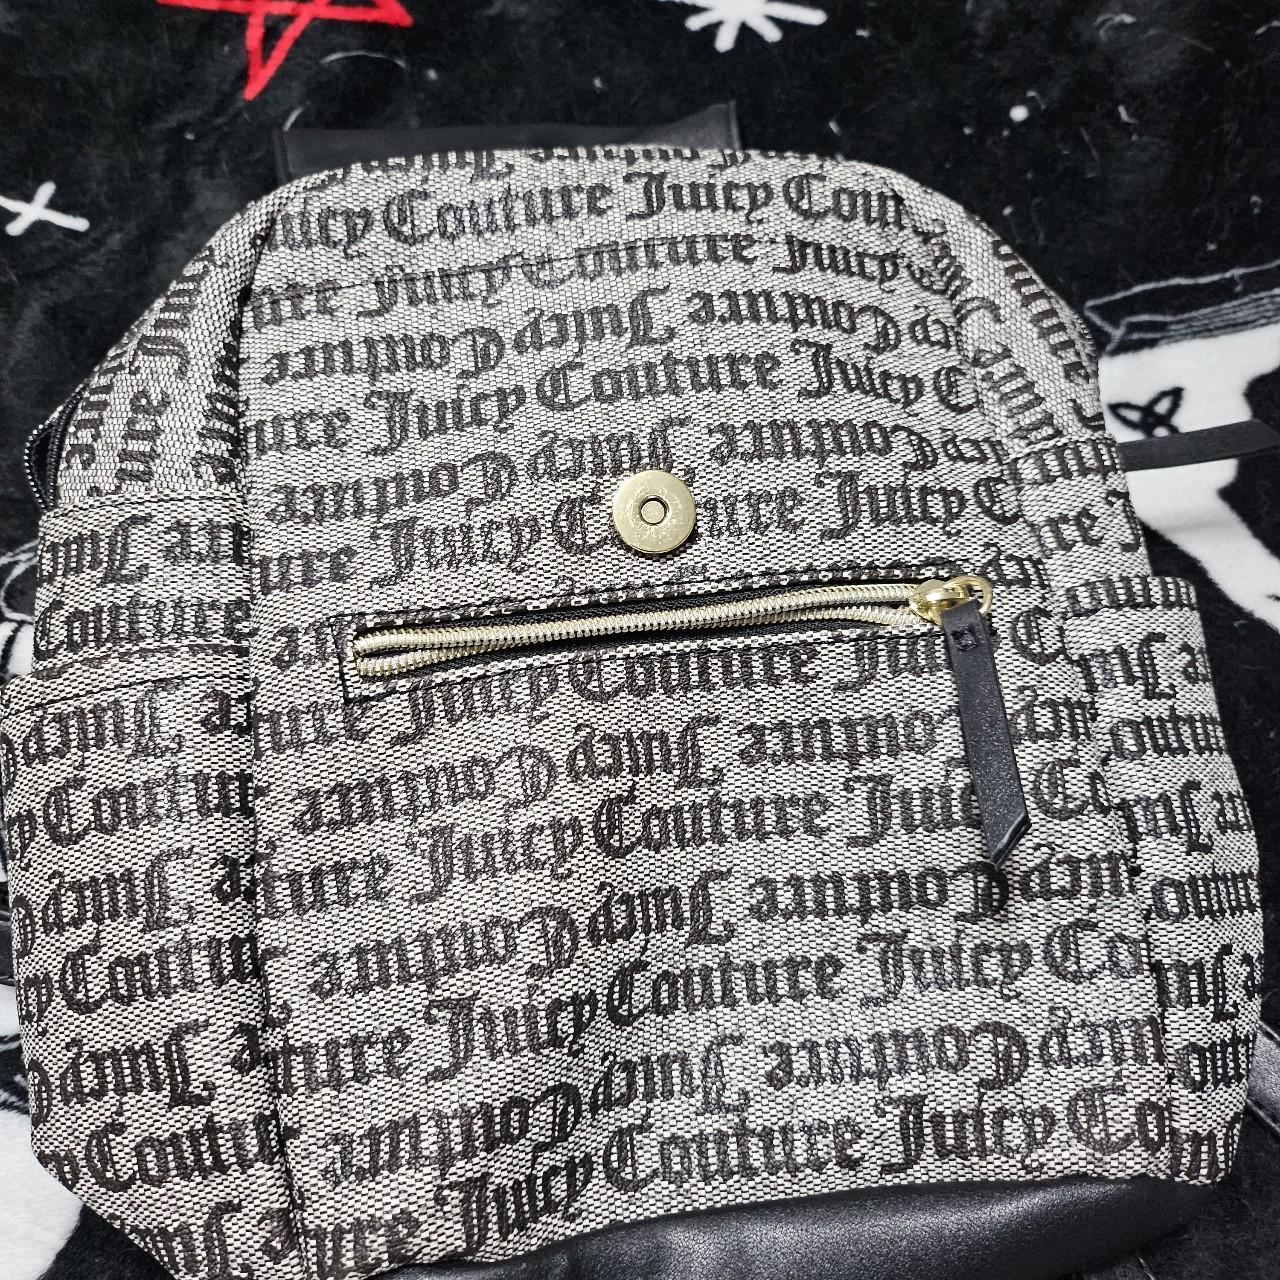 Juicy Couture Gothic Status Black Backpack